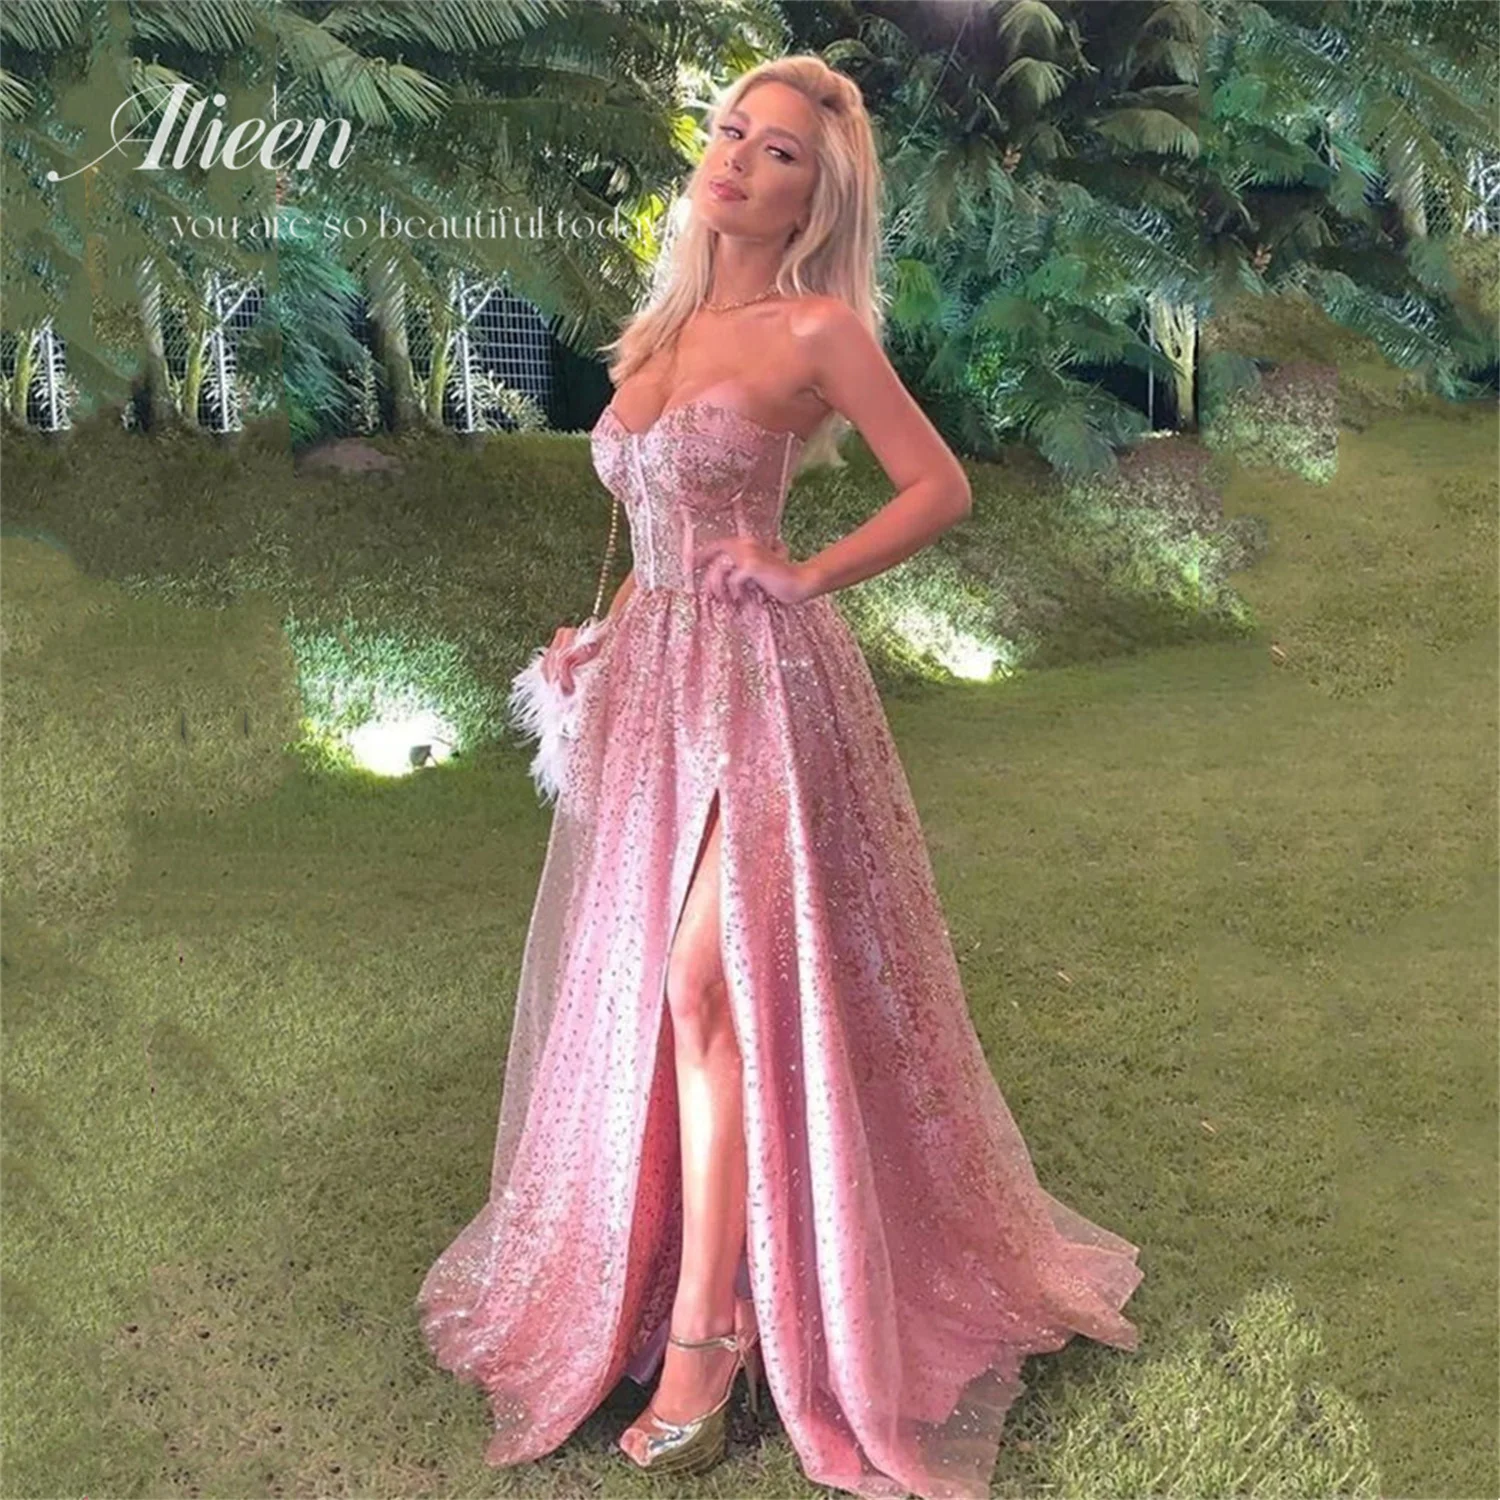 

Pink Luxury Evening Dresses for Women 2022 International Brand Dresses for Women Party Wedding Evening Shiny Aileen A-line Robe